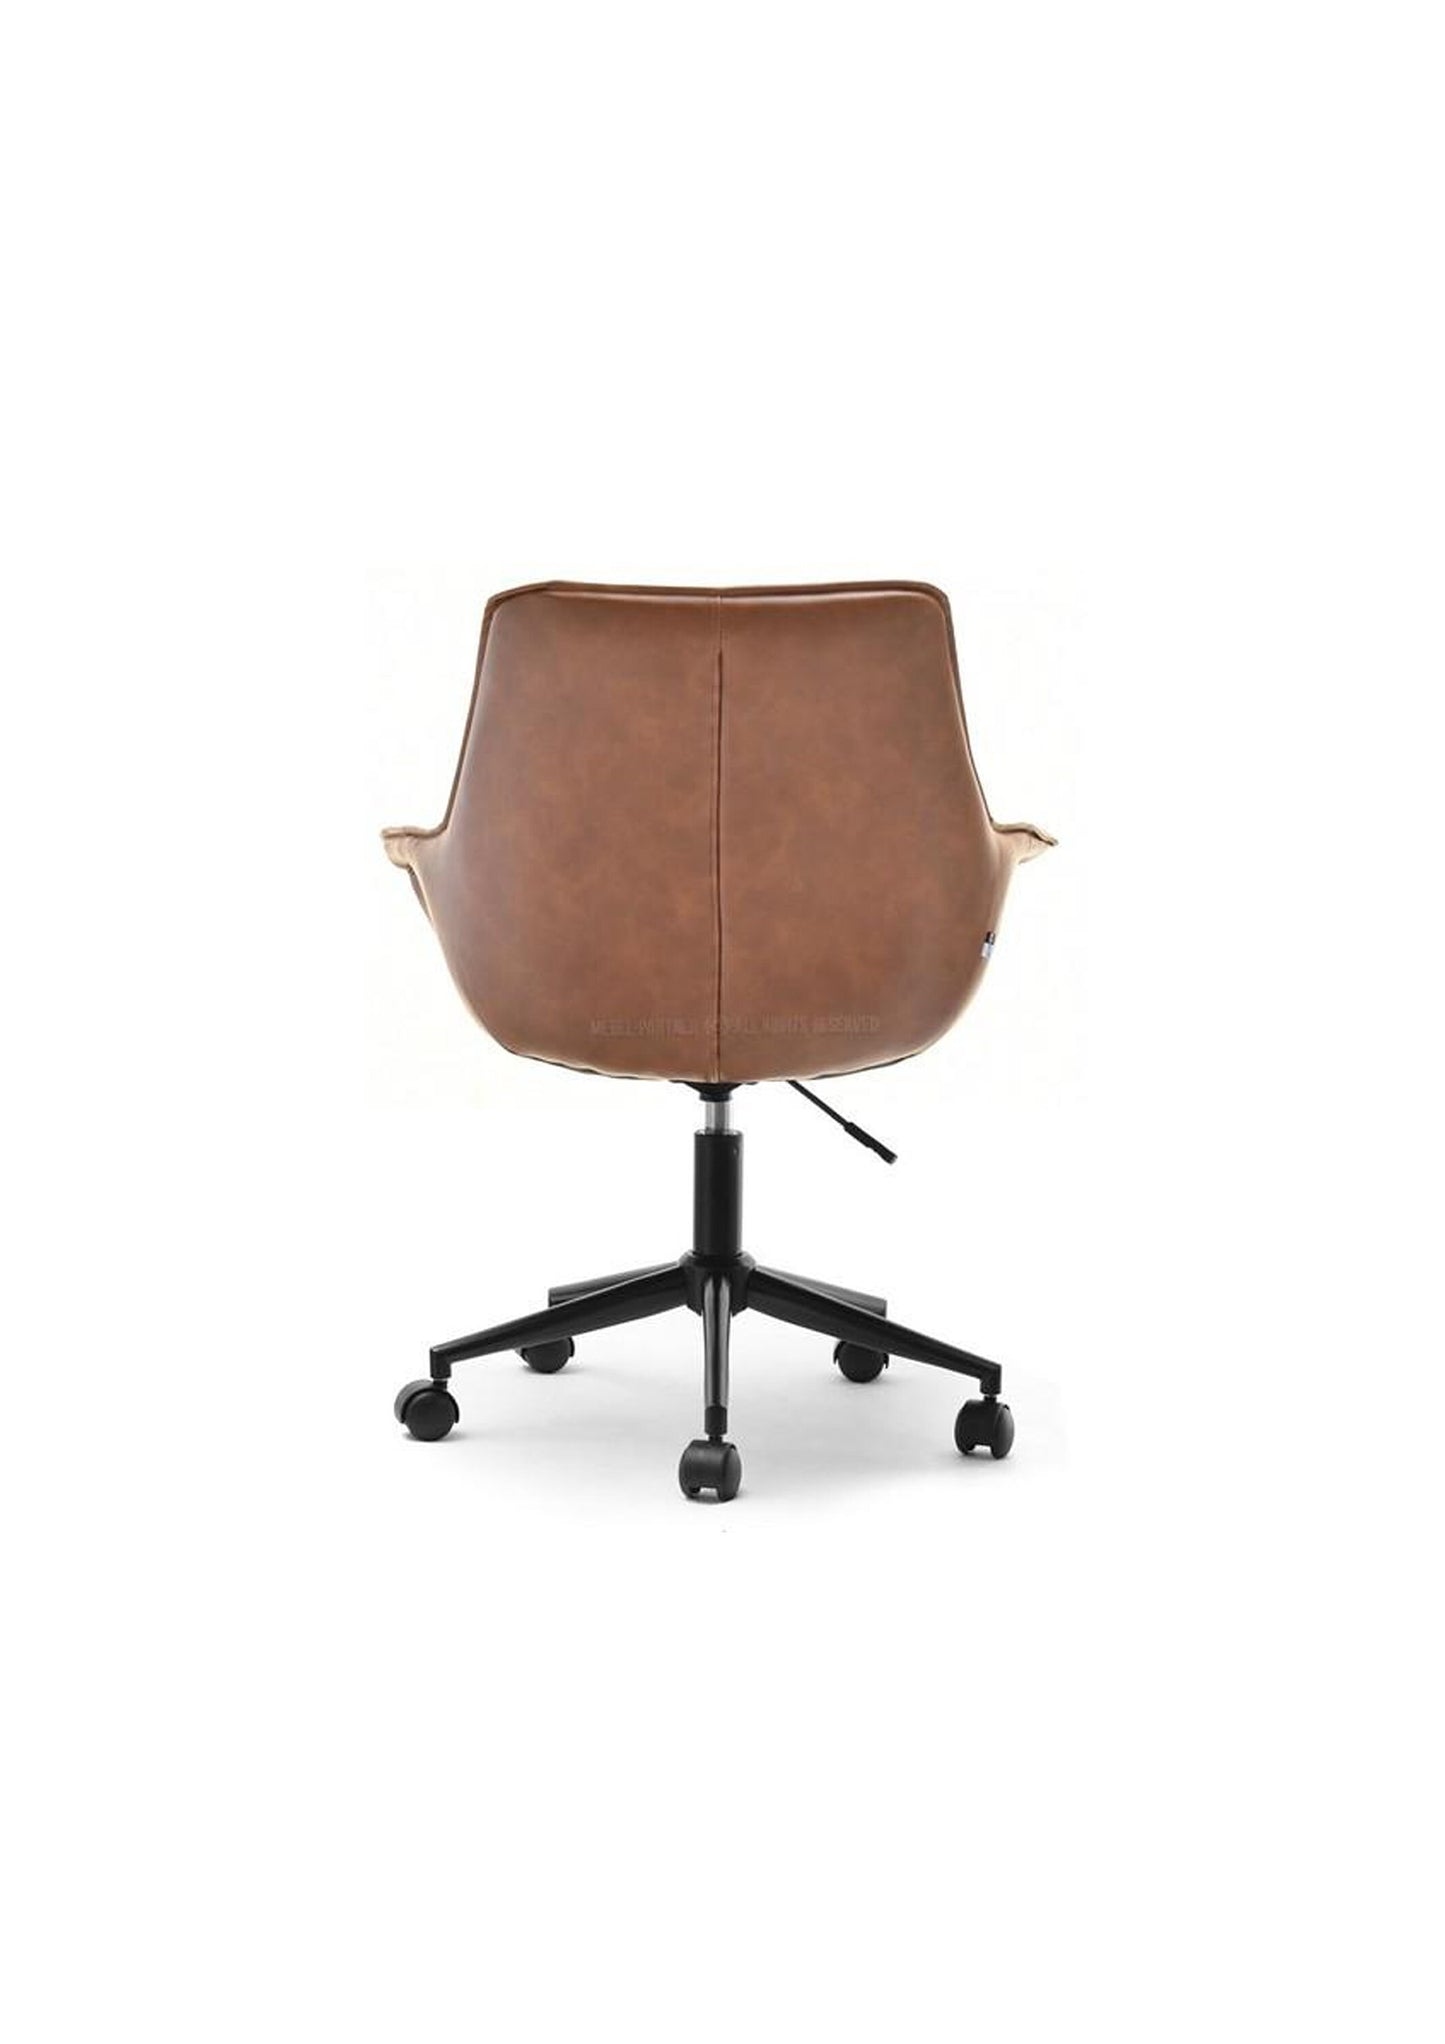 Vintage Retro Style Office Desk Executive Chair in brown faux leather